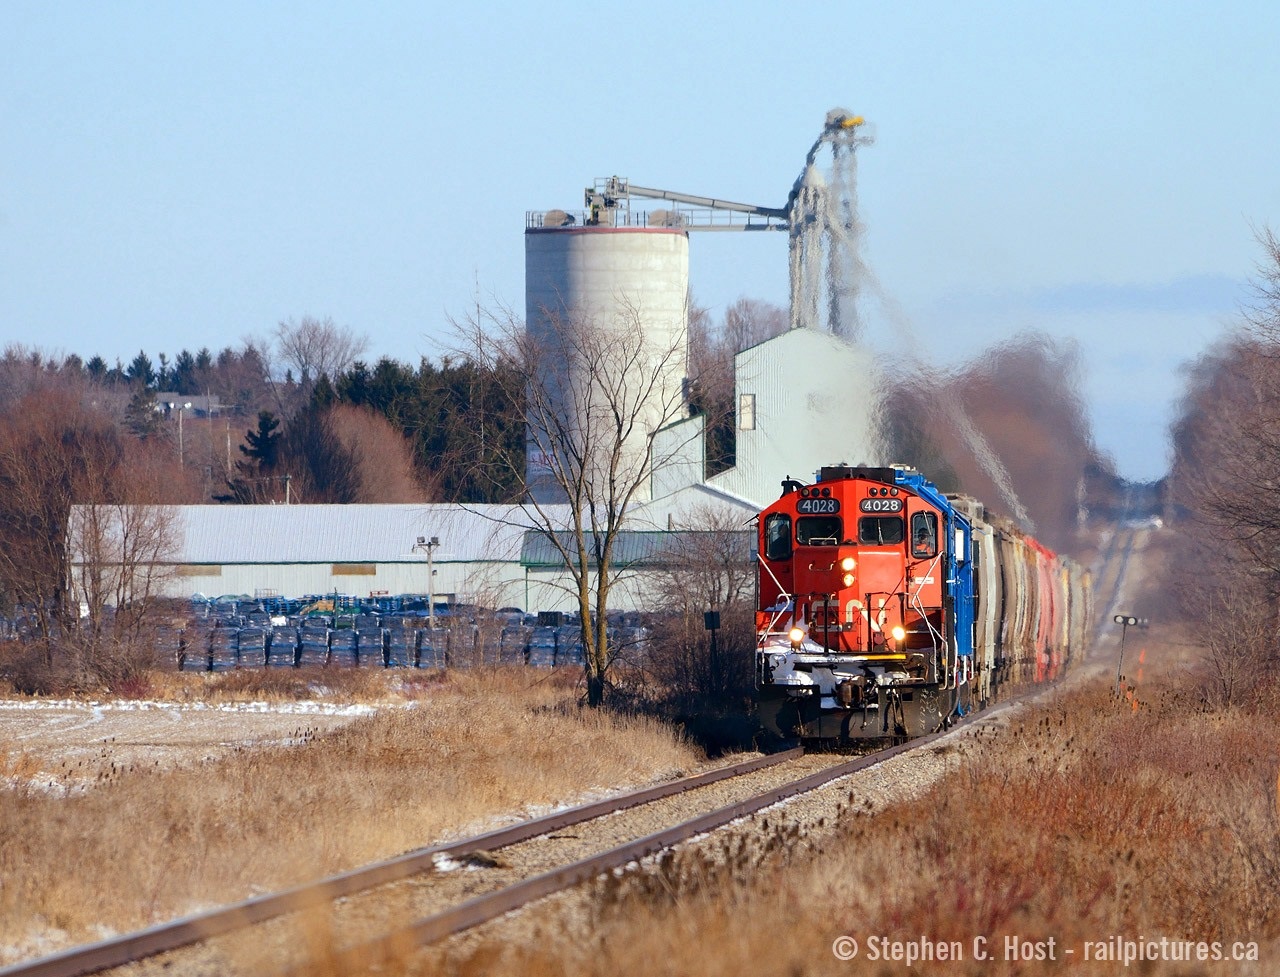 The Guelph subdivision can easily be described as a roller coaster, and this telephoto shot really shows it off well. CN L568 is at track speed of 55 MPH as they rush toward Stratford with 17 loads of fertilizer. From Kitchener to Highway 7, the Guelph sub can be described as a turkey trail (25 mph) but after HWY 7 and in the straight to Stratford, they are a rocket and chasing is impossible - you only get one chance. The customer in the background is apparently two customers, Shakespeare Mills Inc. and Quality Fertilizers Inc., both are active. I wish I did this shot in the GEXR days, but it's too late. With thanks to friend (and one time mod of this site!) Kyle Stefanovic for the inspiration.